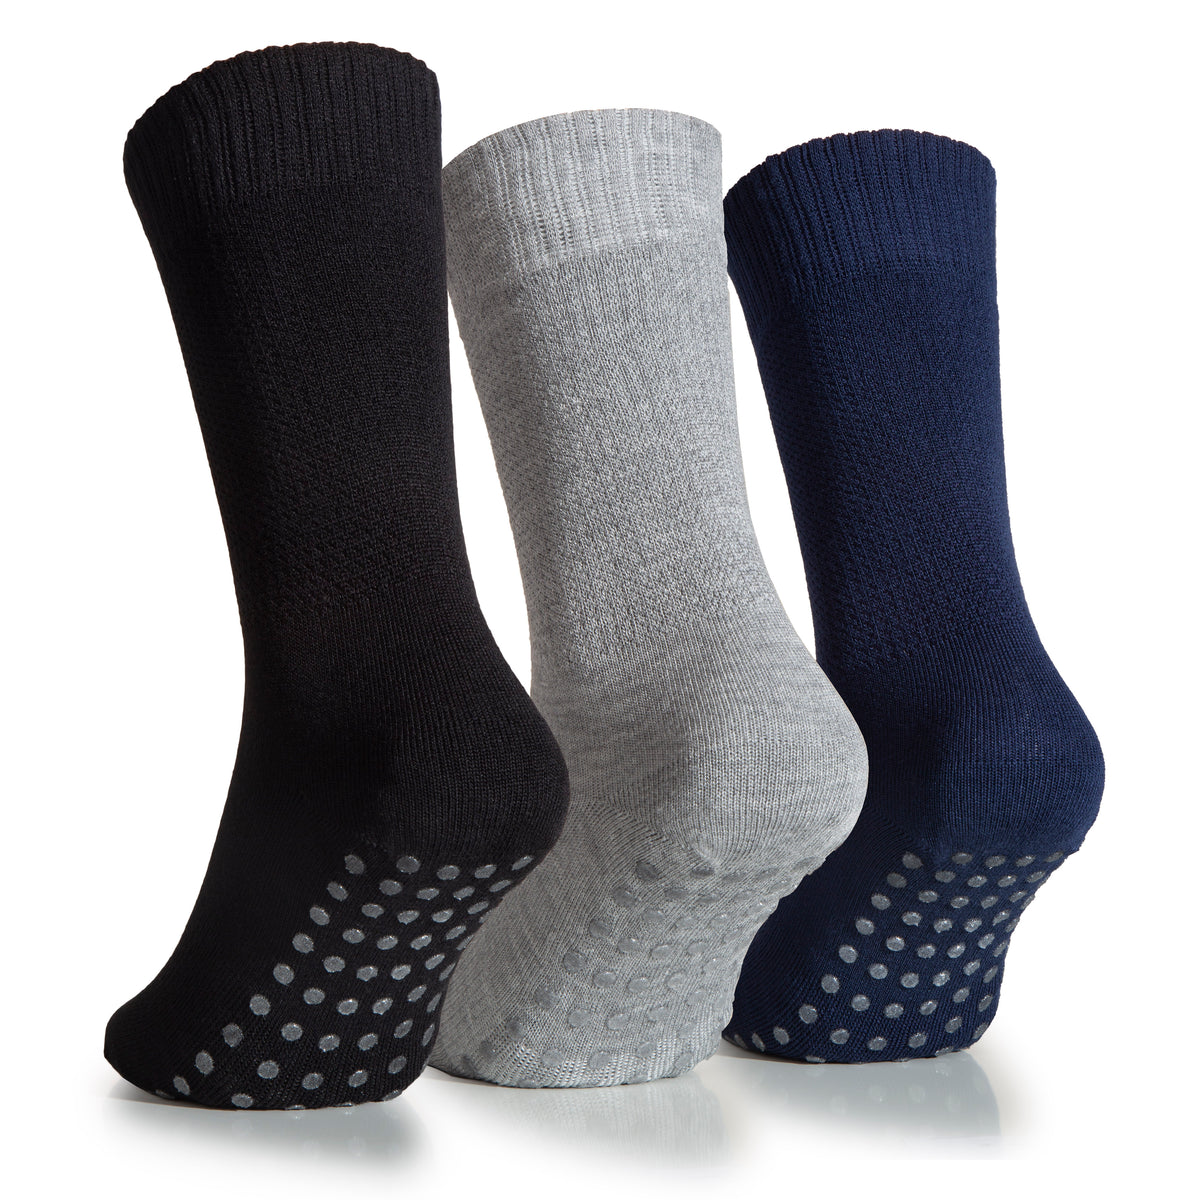 Three pairs of Women's Bamboo Diabetic Ankle Socks with Non Slip Grip. The socks are black, grey, and blue and feature dotted bottoms for added traction.